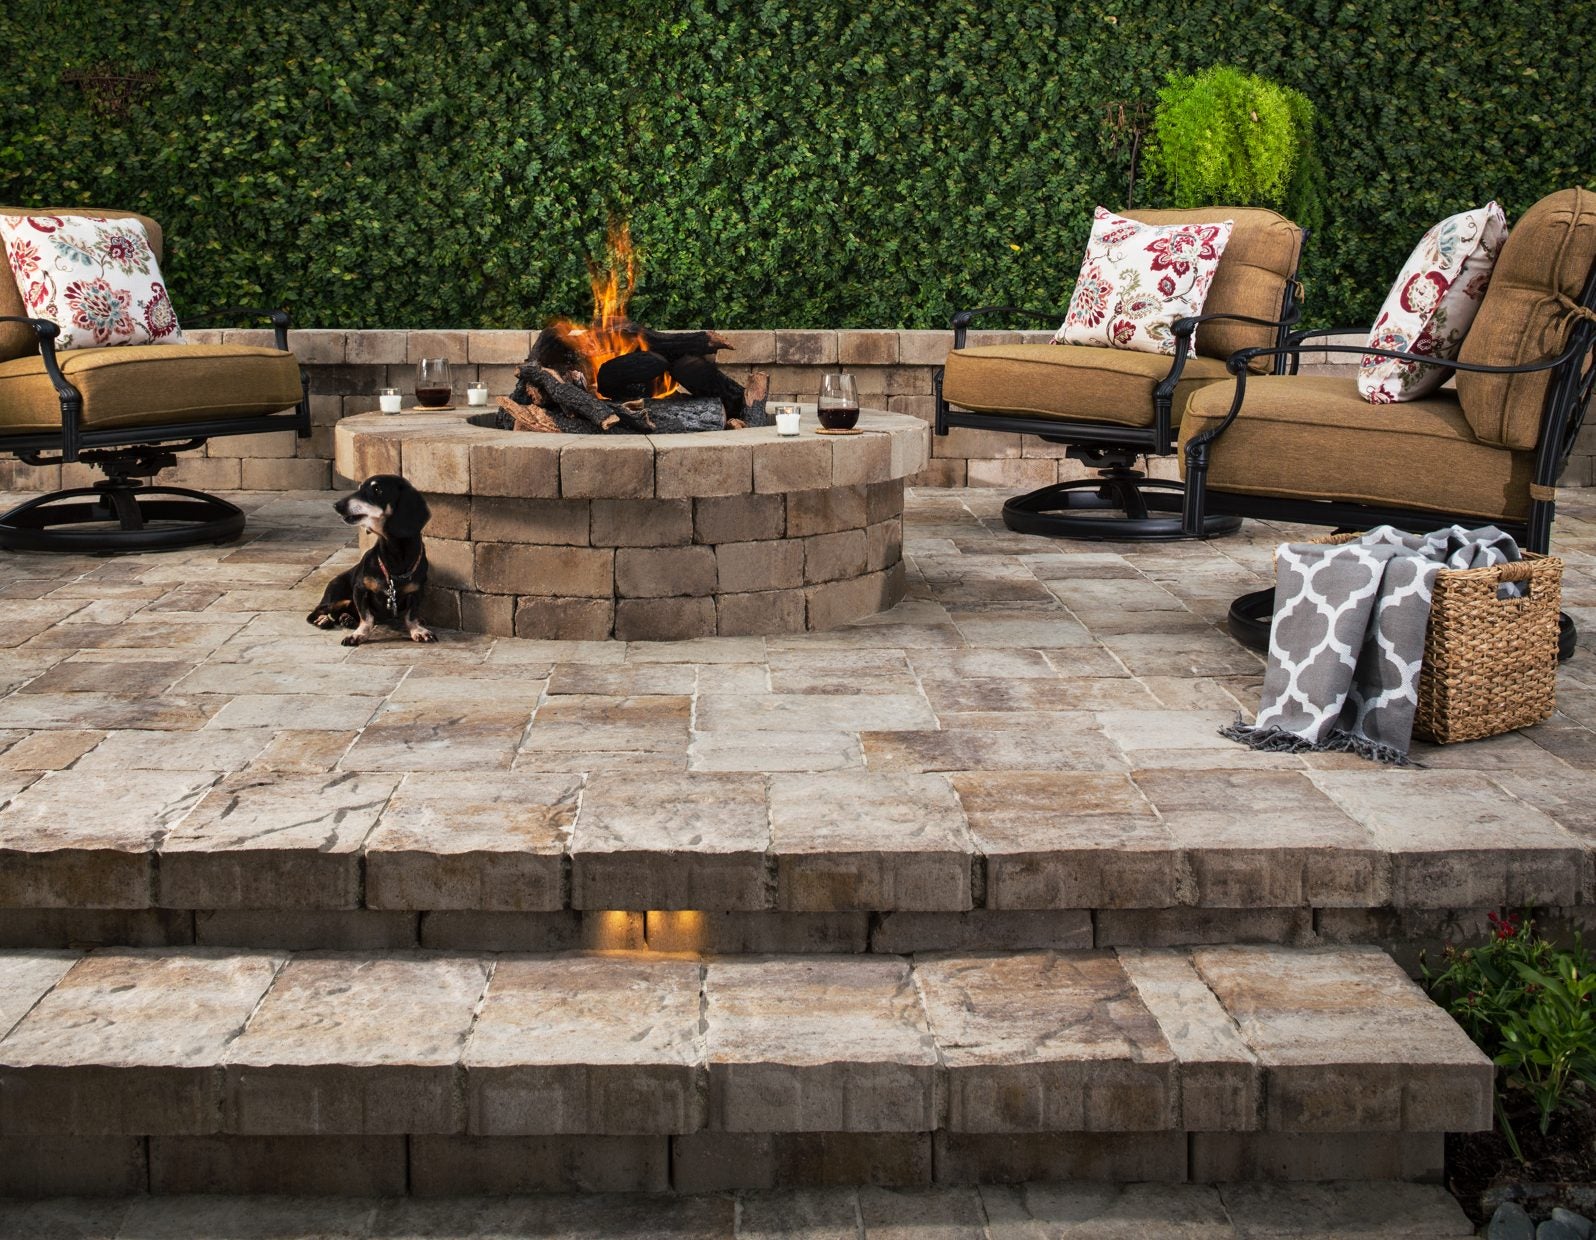 Patio Fire Pit Design Ideas with Shrubs